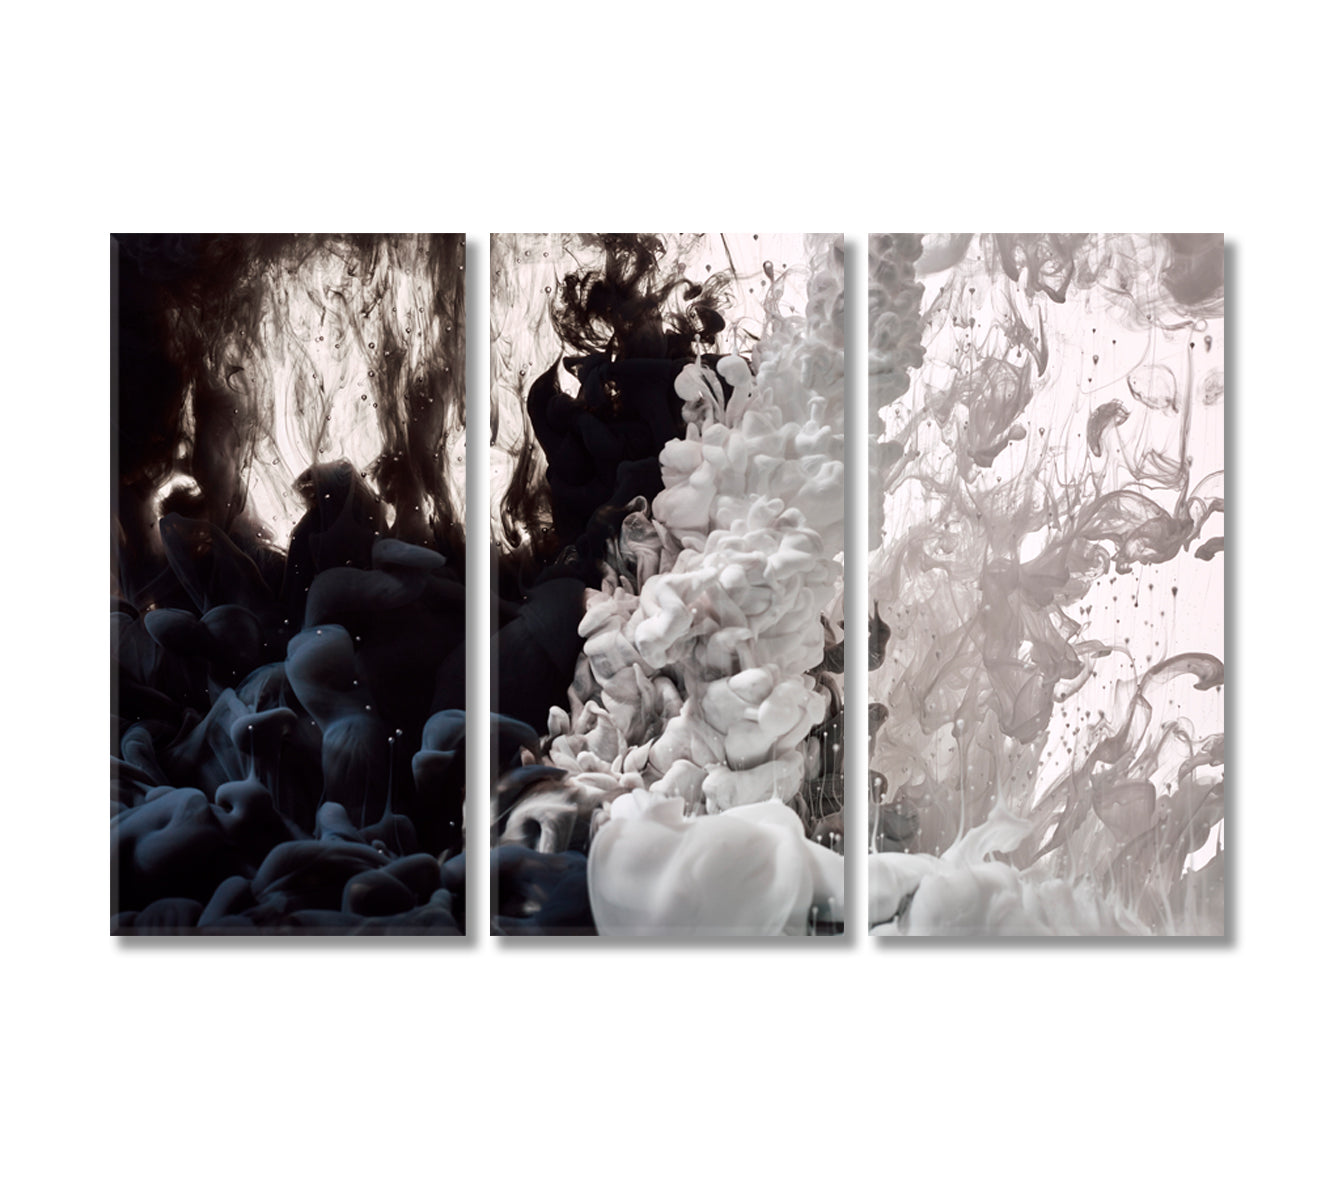 Abstract Black And White Paint Splash in Water Canvas Print-Canvas Print-CetArt-3 Panels-36x24 inches-CetArt